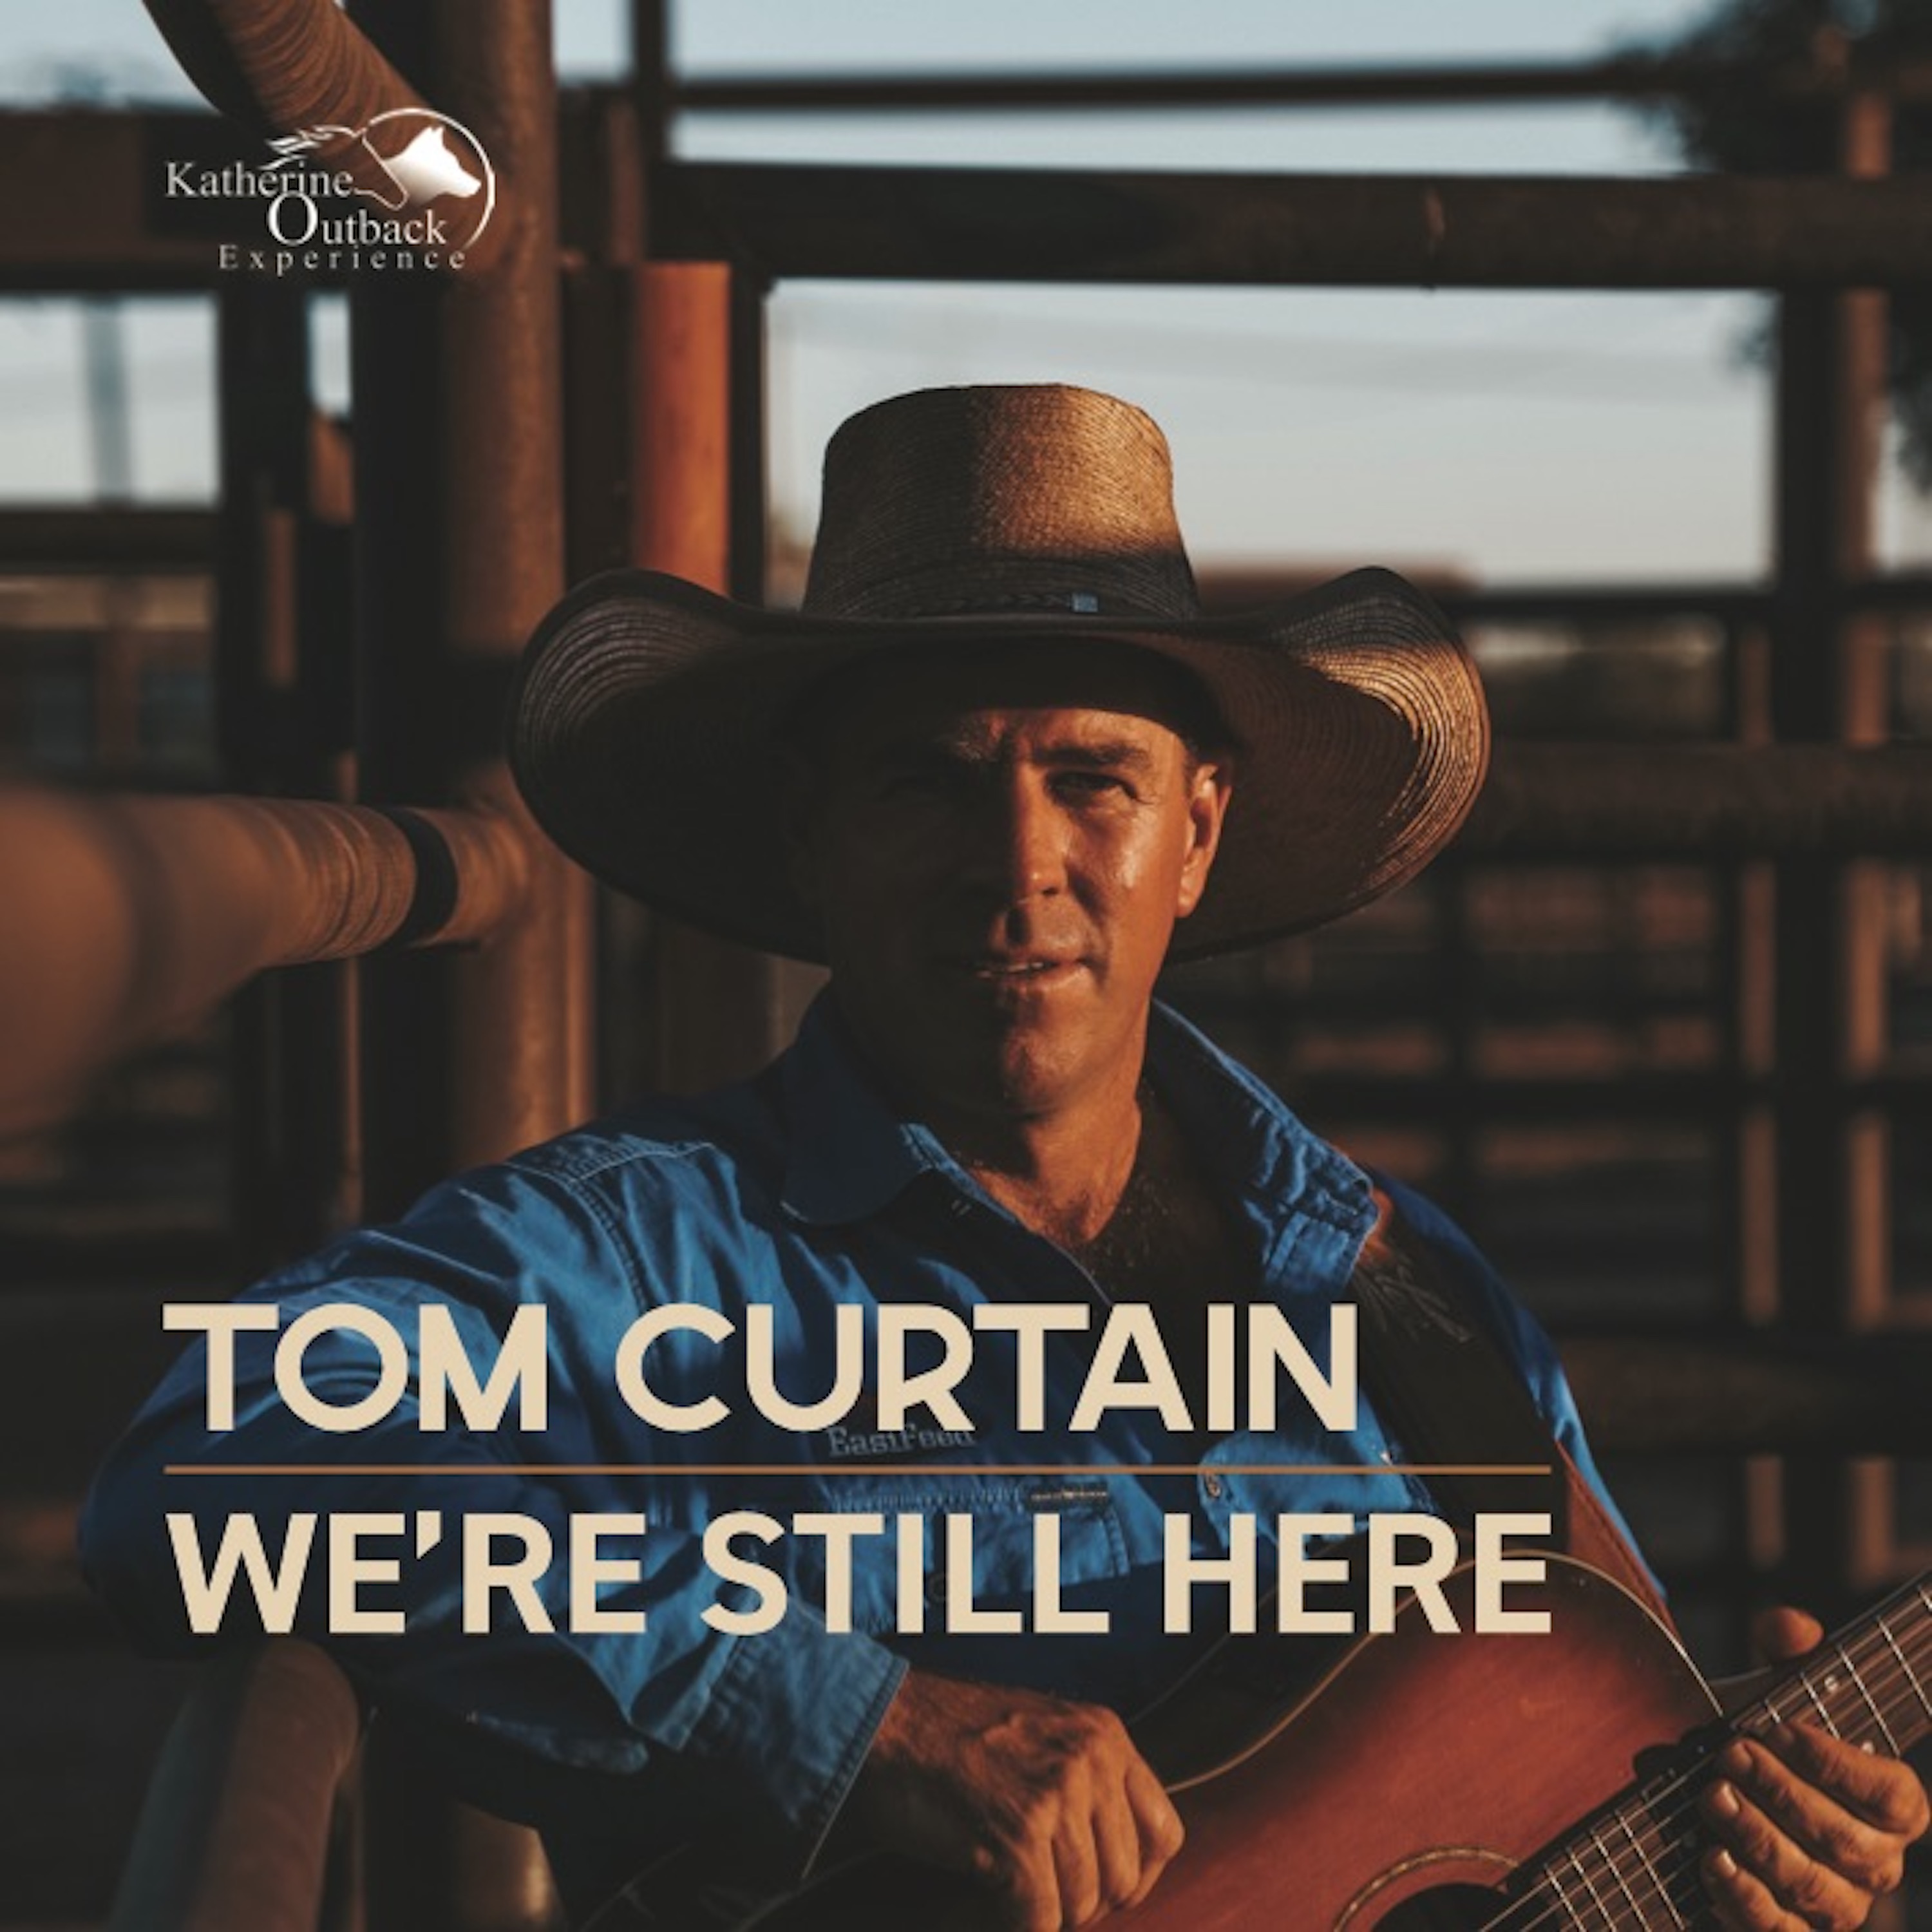 Tom Curtain's new single 'We're Still Here'